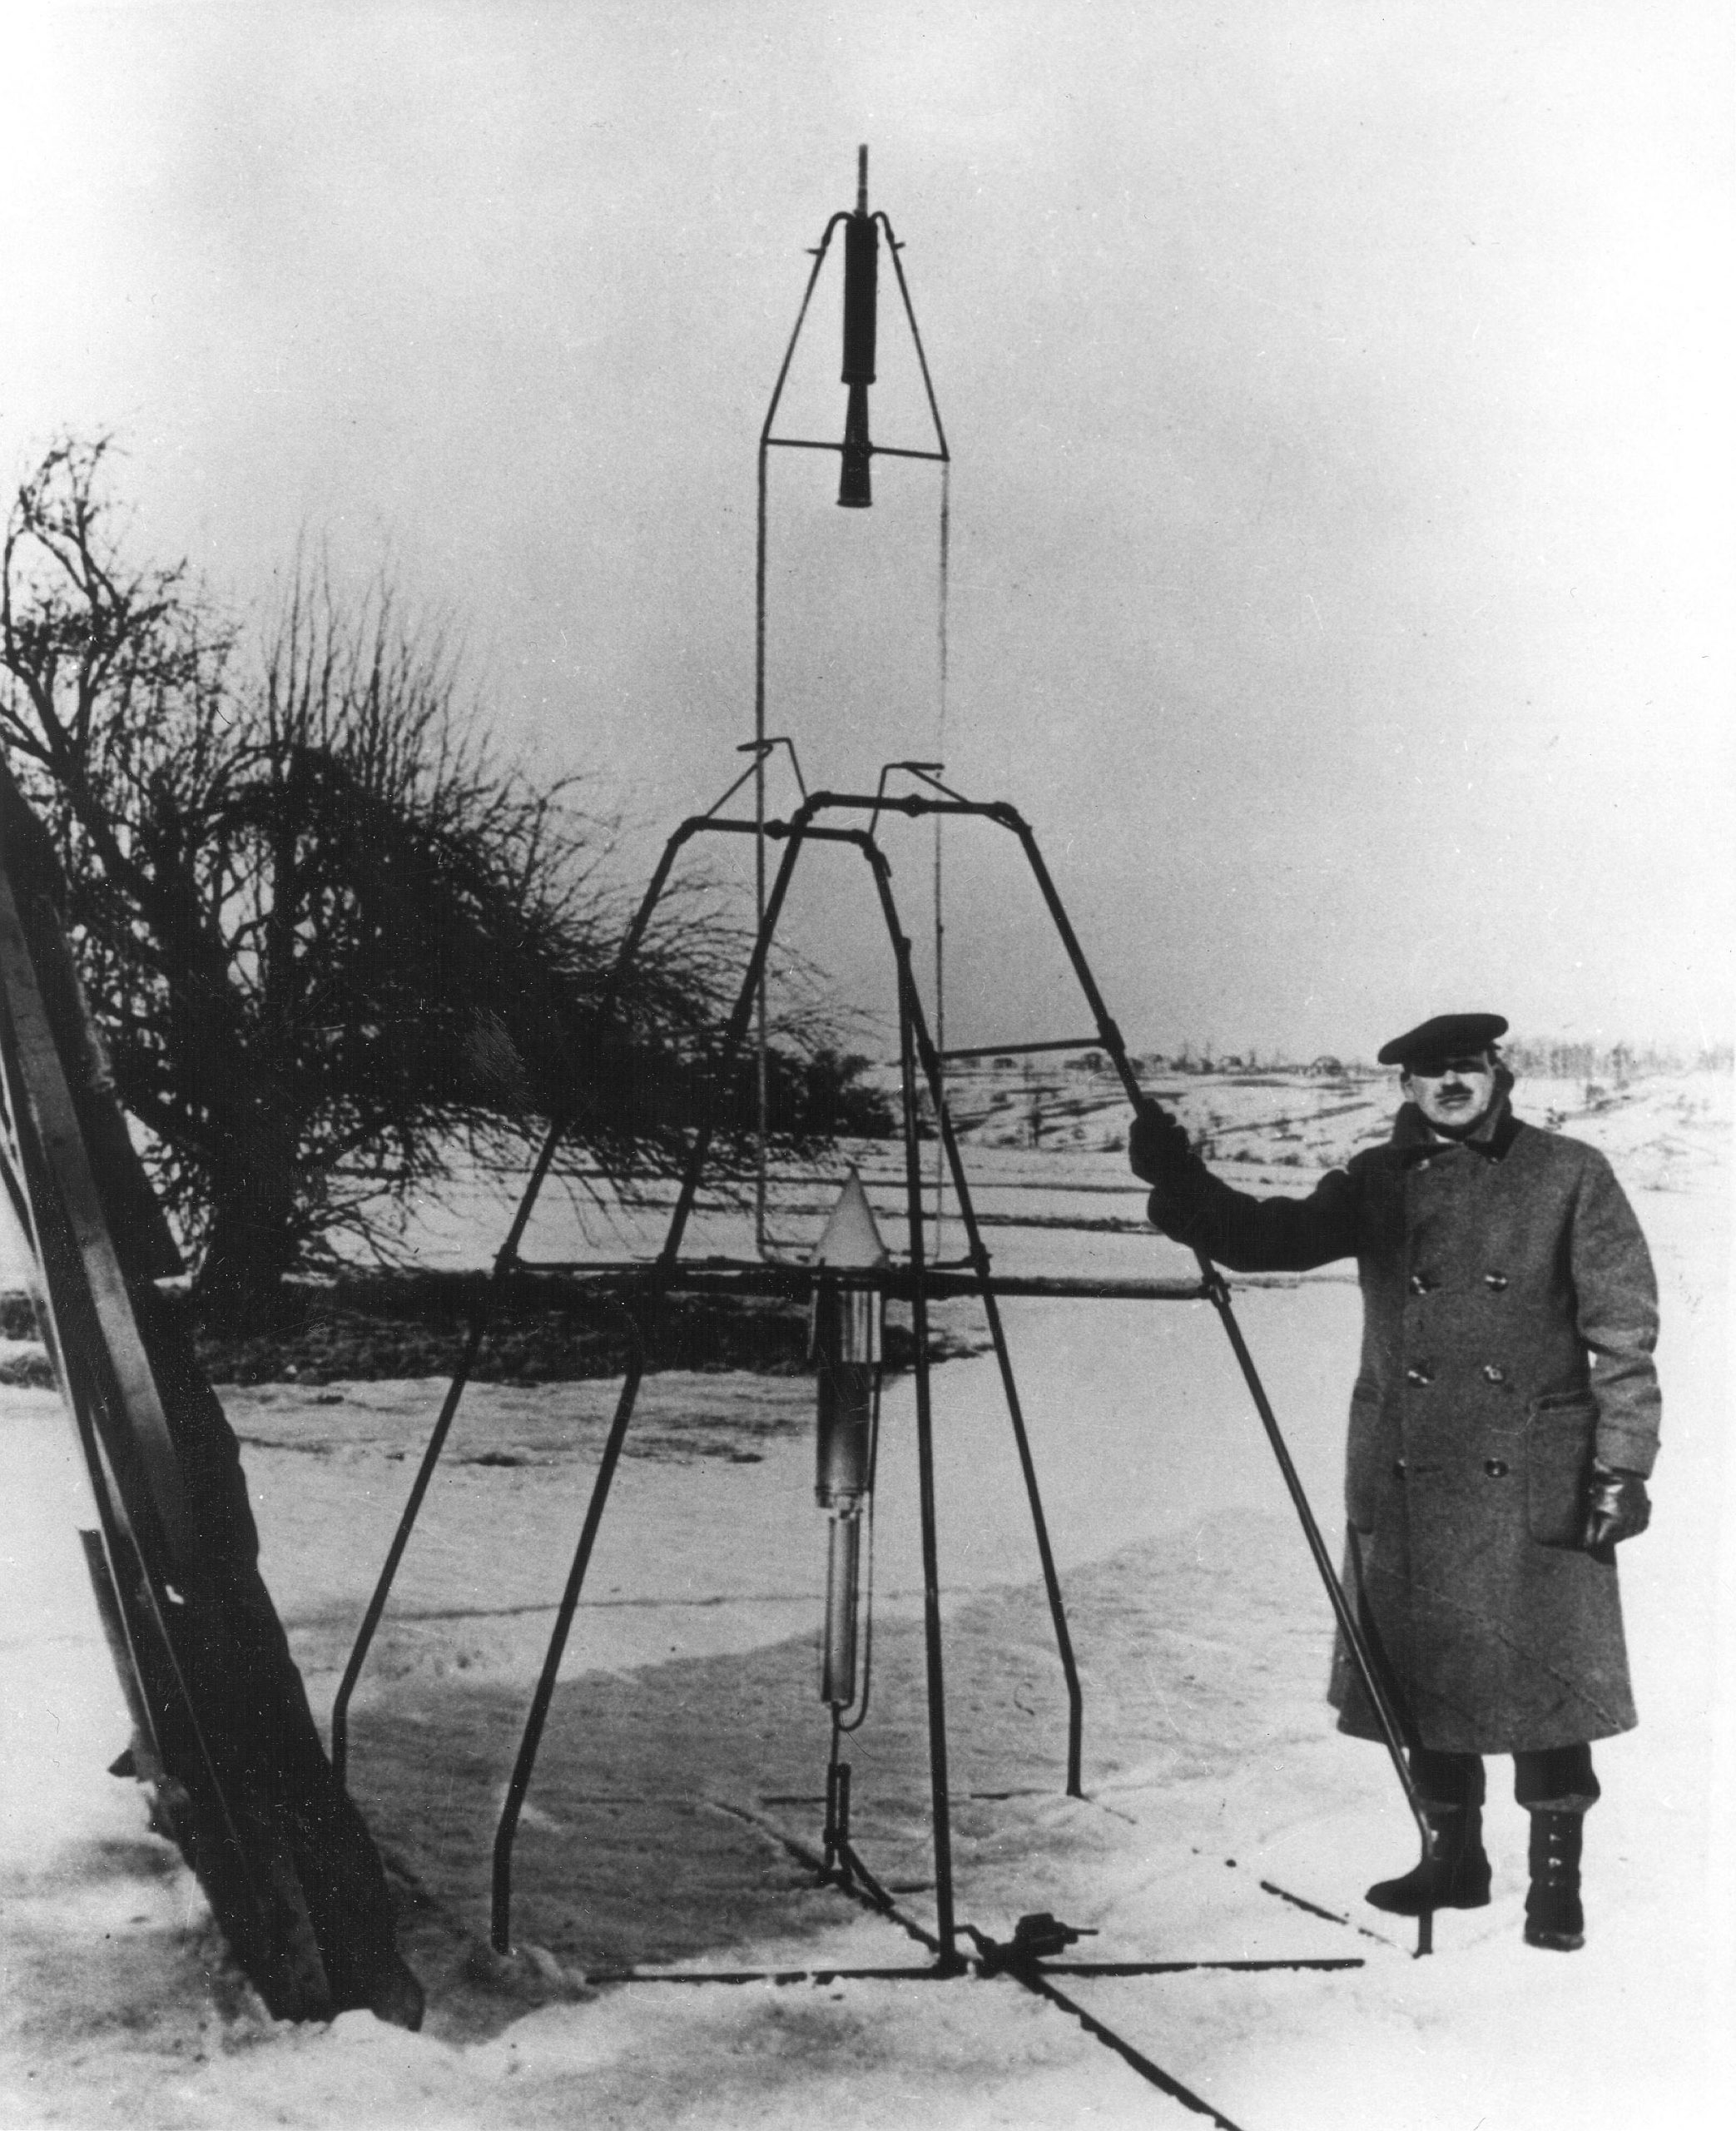 Goddard stands in the snow next to a structure holding his rocket. The structure and rocket are about twice as tall as he is. 